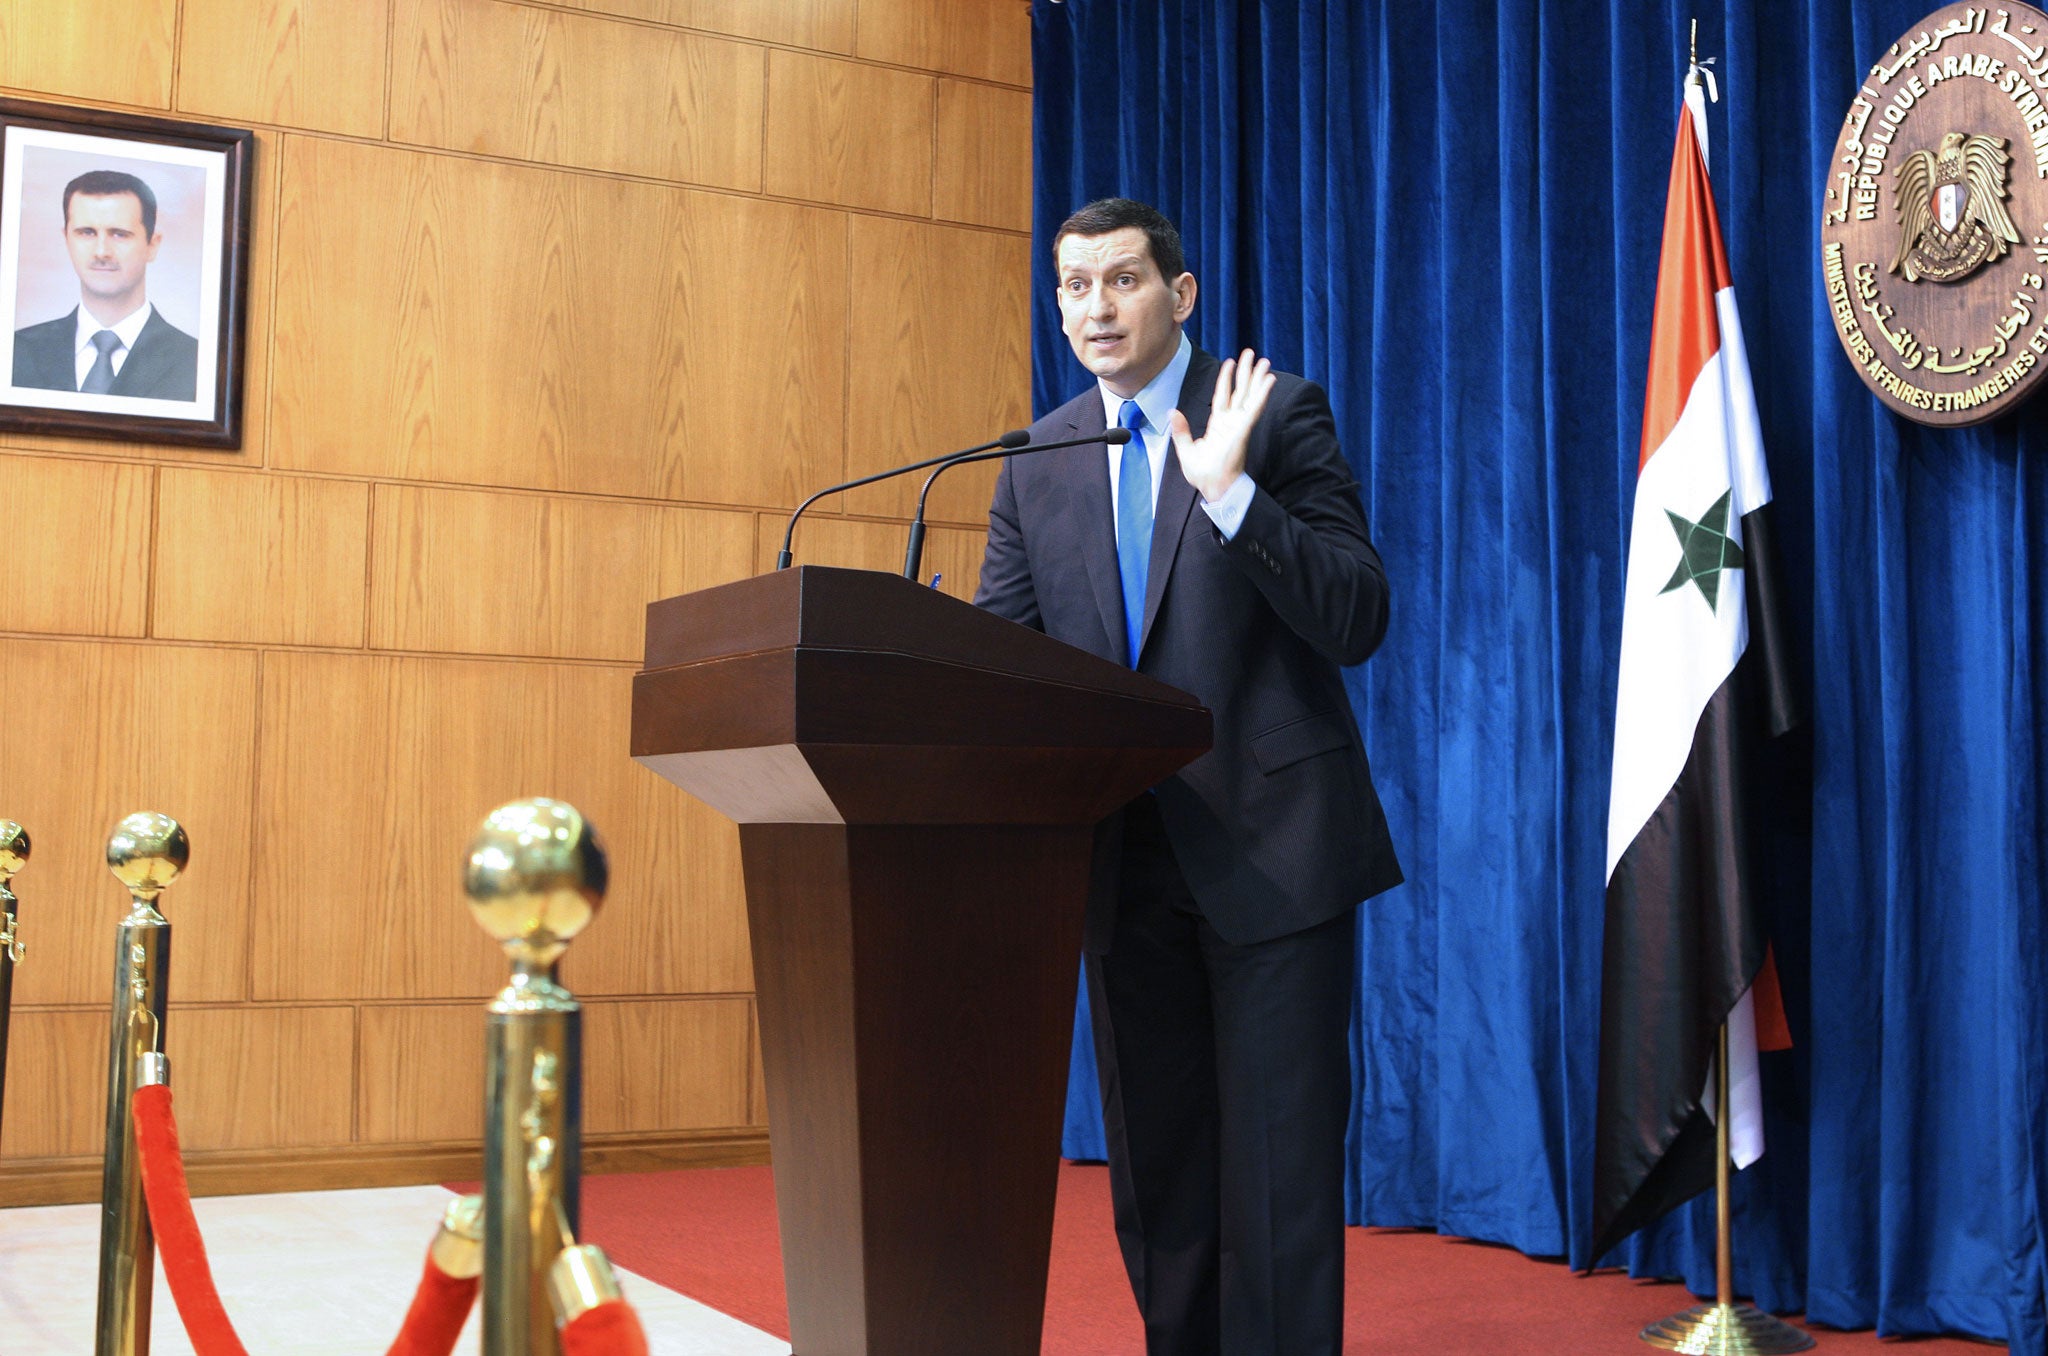 Syrian foreign ministry spokesman Jihad al-Makdissi addresses journalists in Damascus on May 27, 2012, stressing that the Syrian government was 'not at all' responsible for the massacre of at least 92 people in the central town of Houla which has sparked an international outcry.